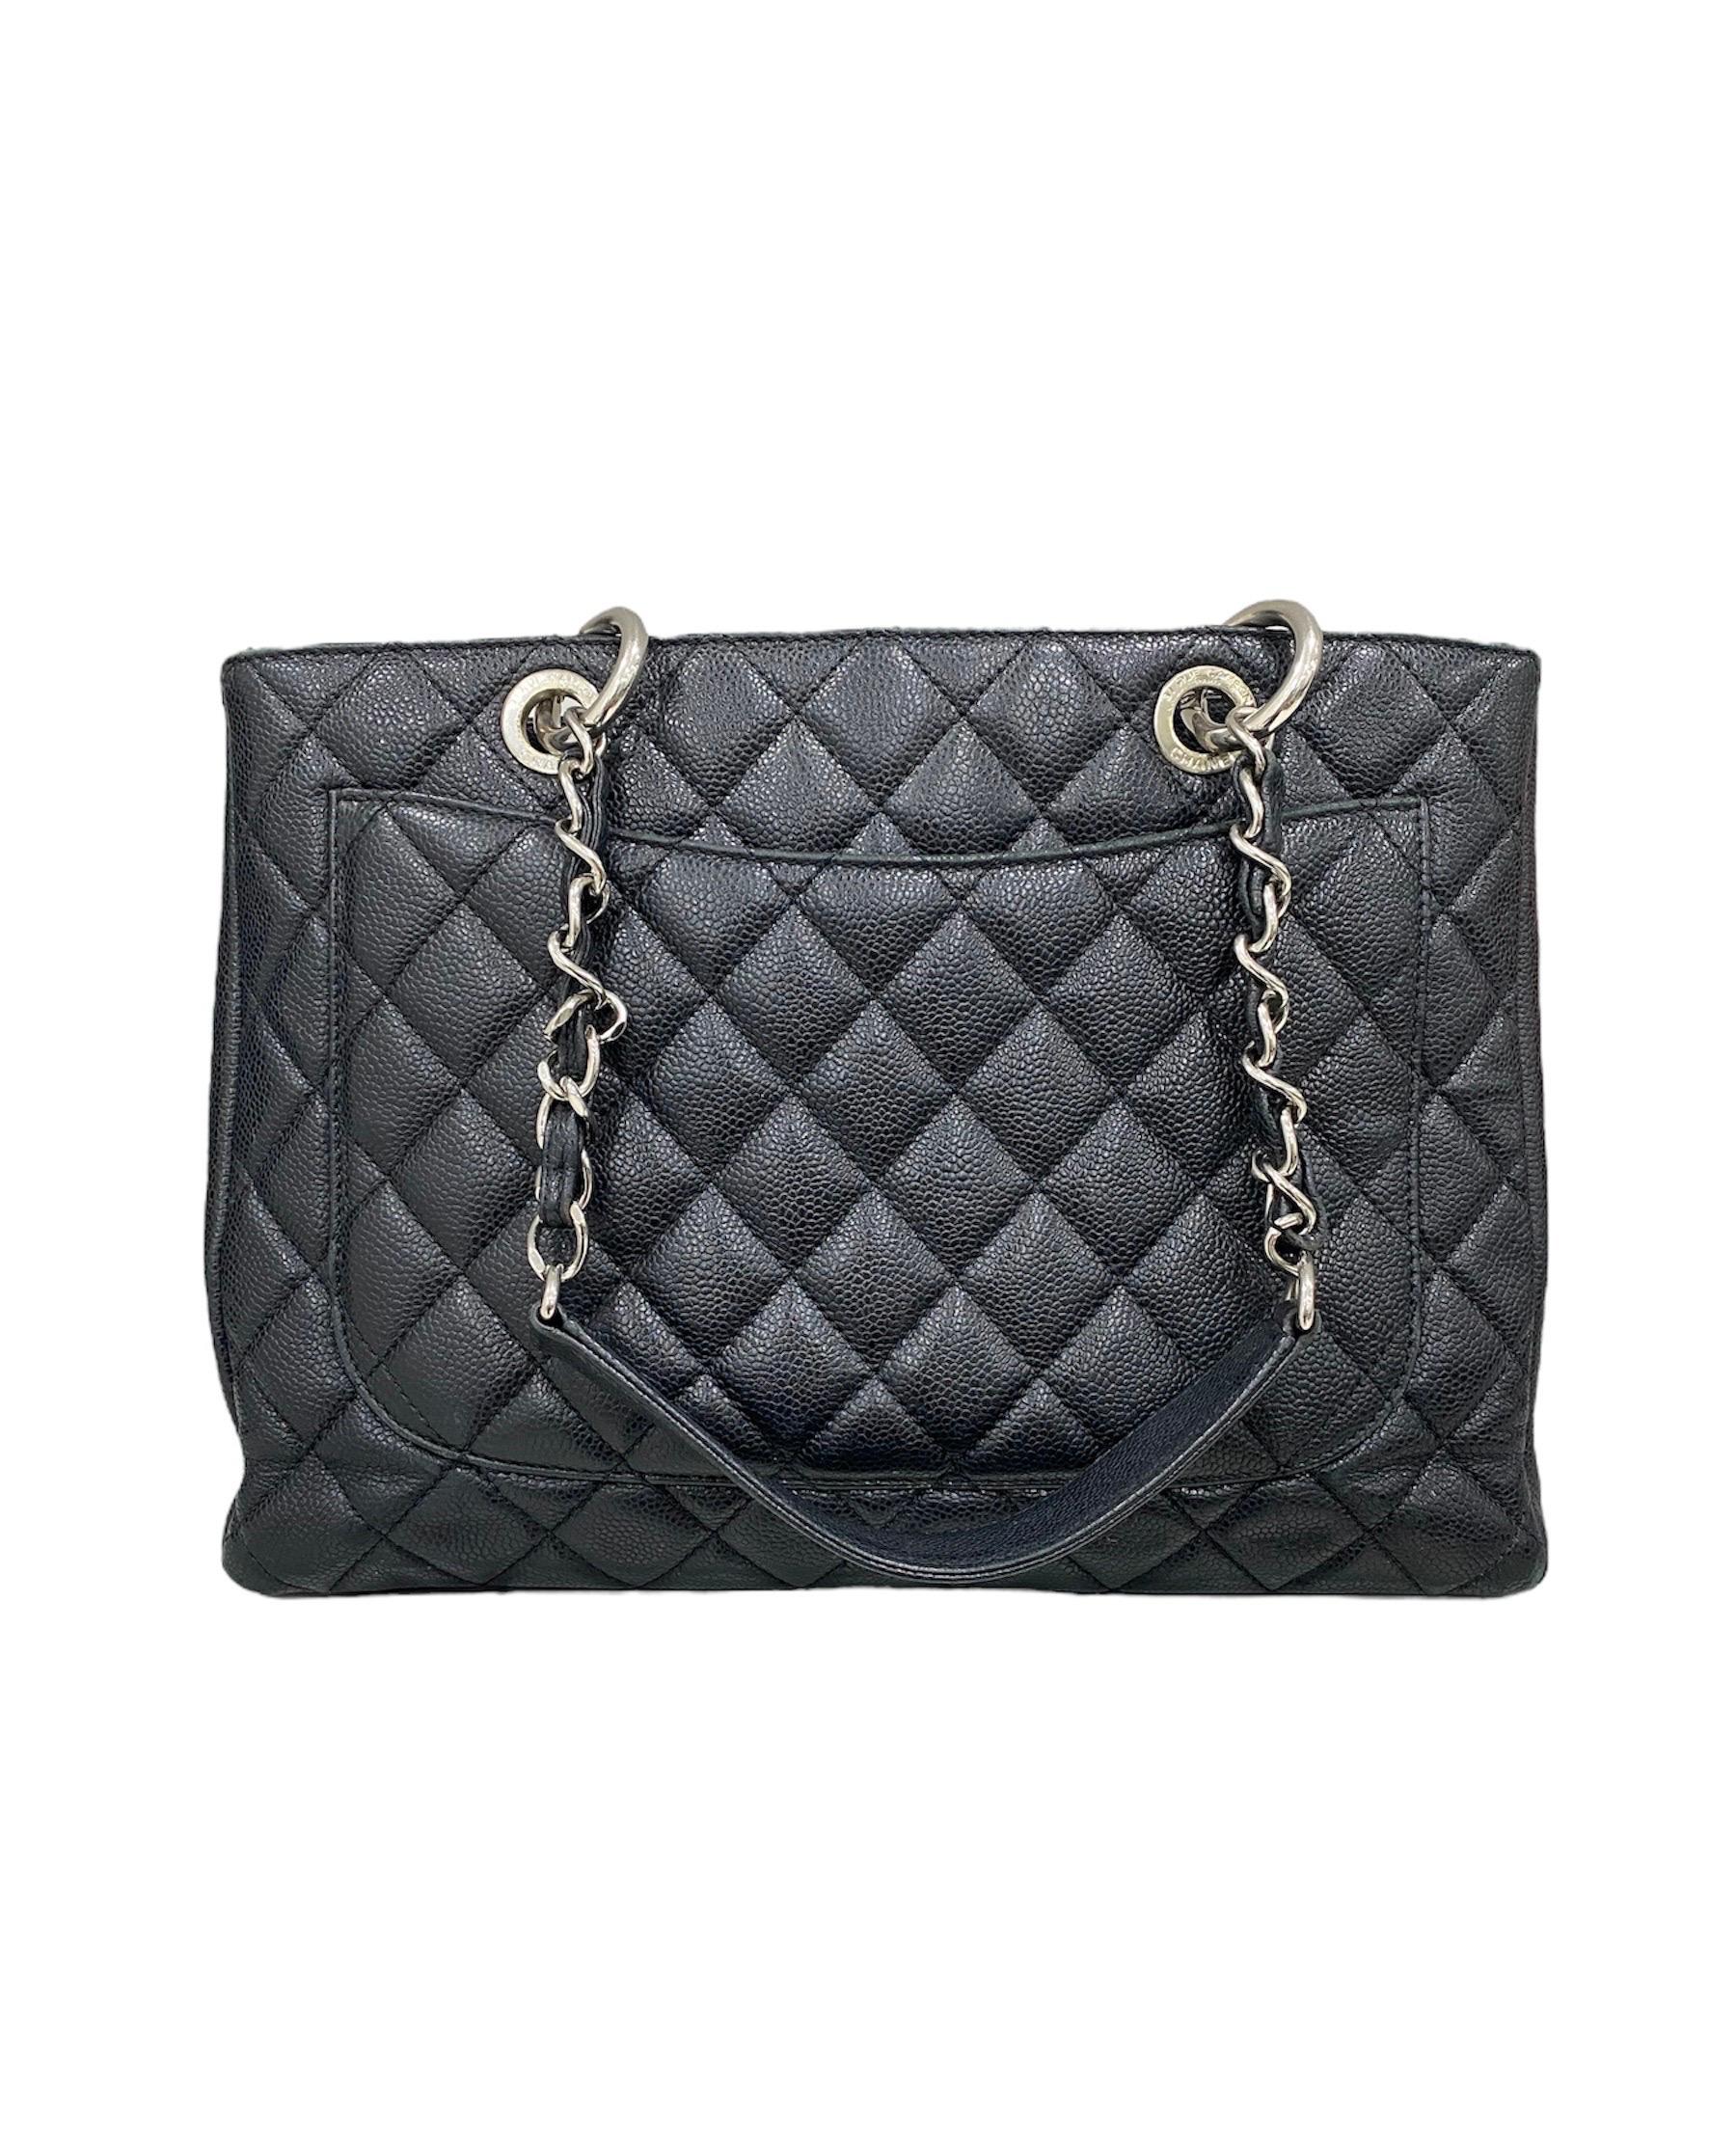 Chanel signed bag, GST model, made of black caviar leather with silver hardware.

It is not equipped with any type of closure, but has a central pocket with zip closure.

Equipped with double leather and chain handle, internal hook and